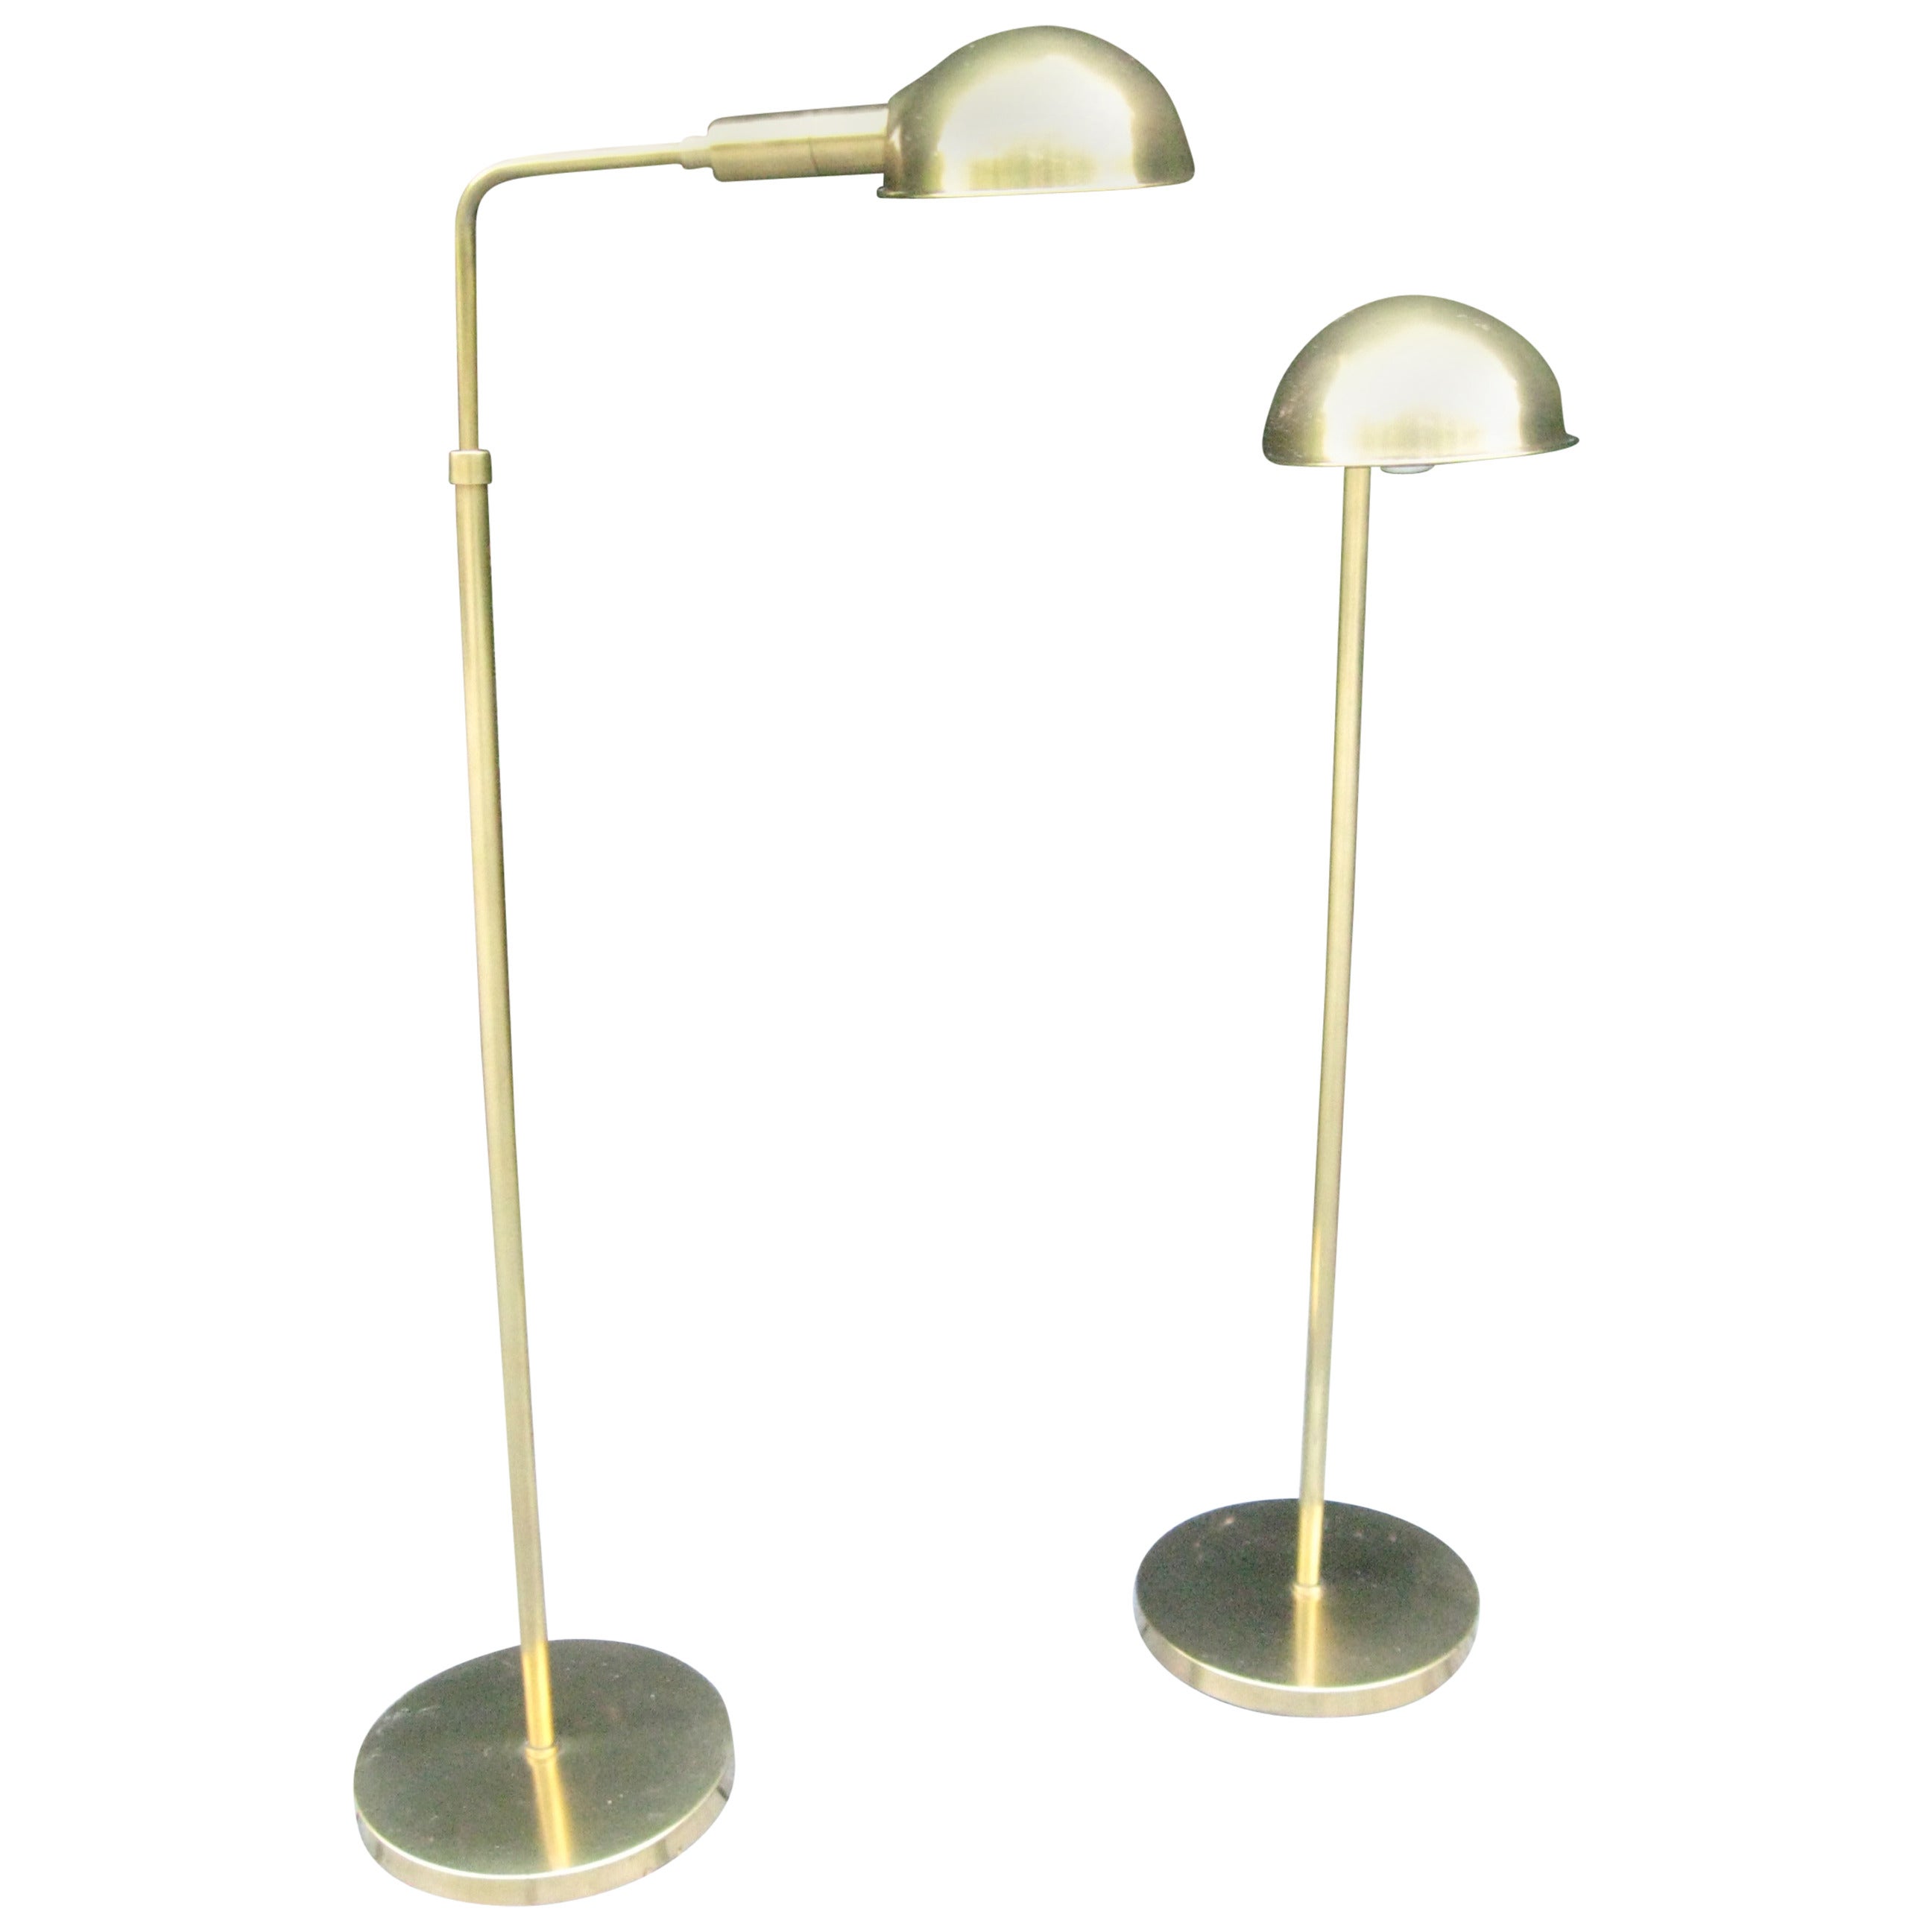 Vintage Pair of Adjustable Brass Floor/Reading Lamps by Chapman